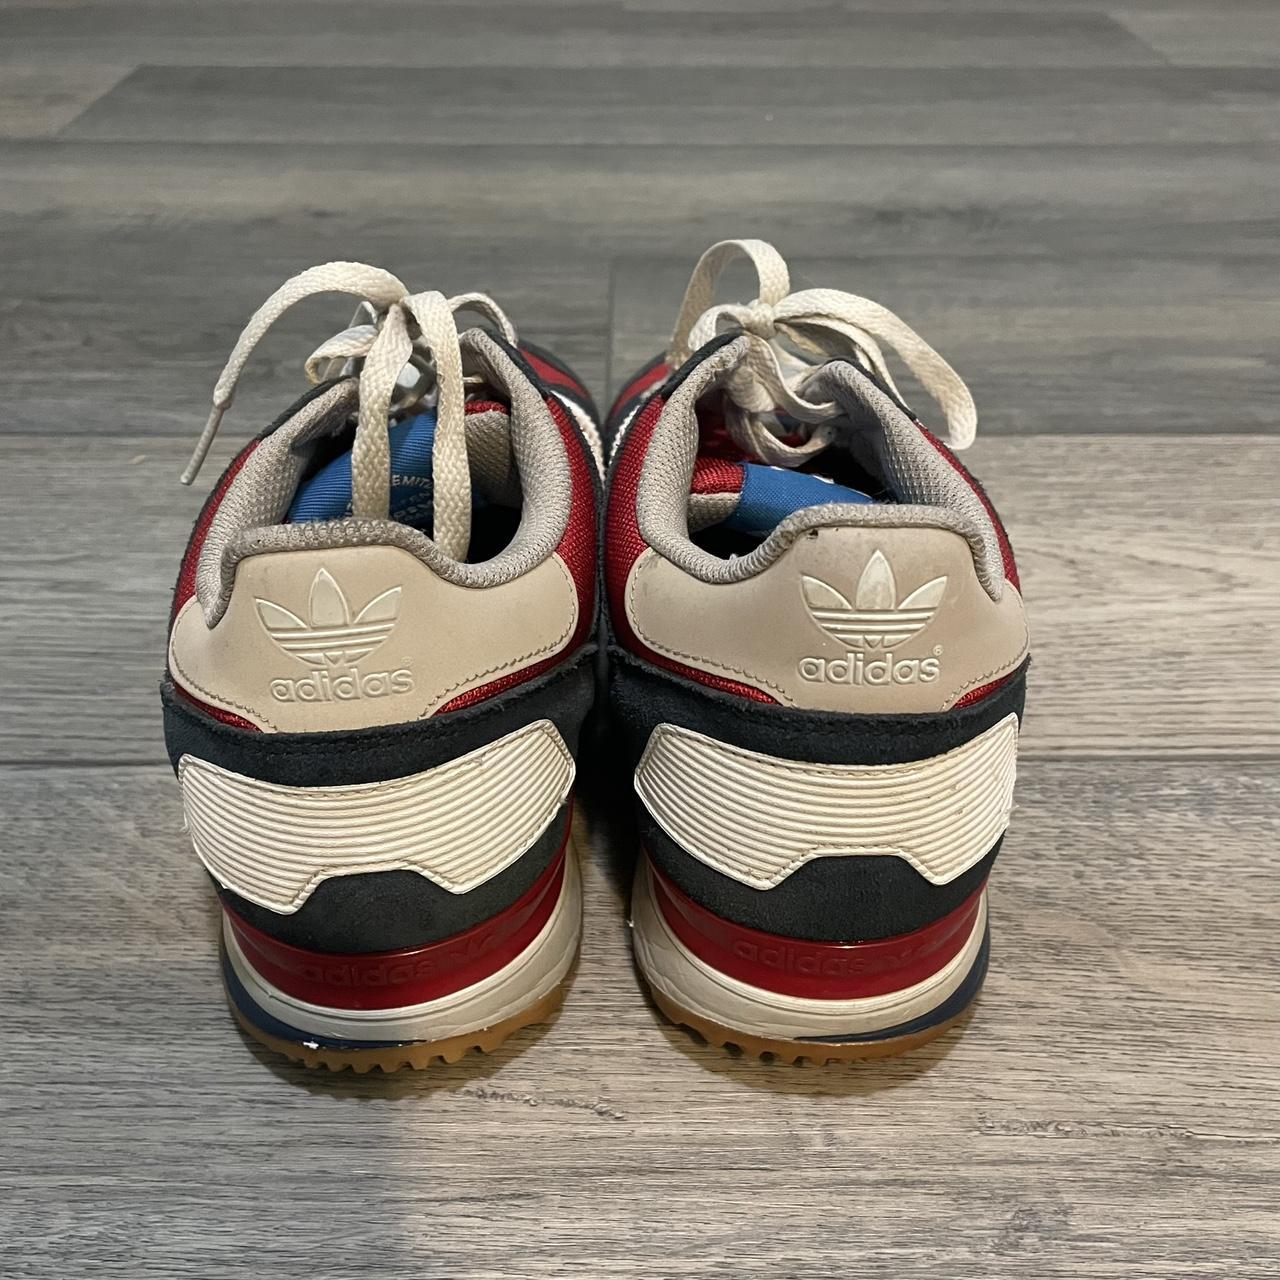 Vintage Adidas ZX700 G96517 Red White and Blue